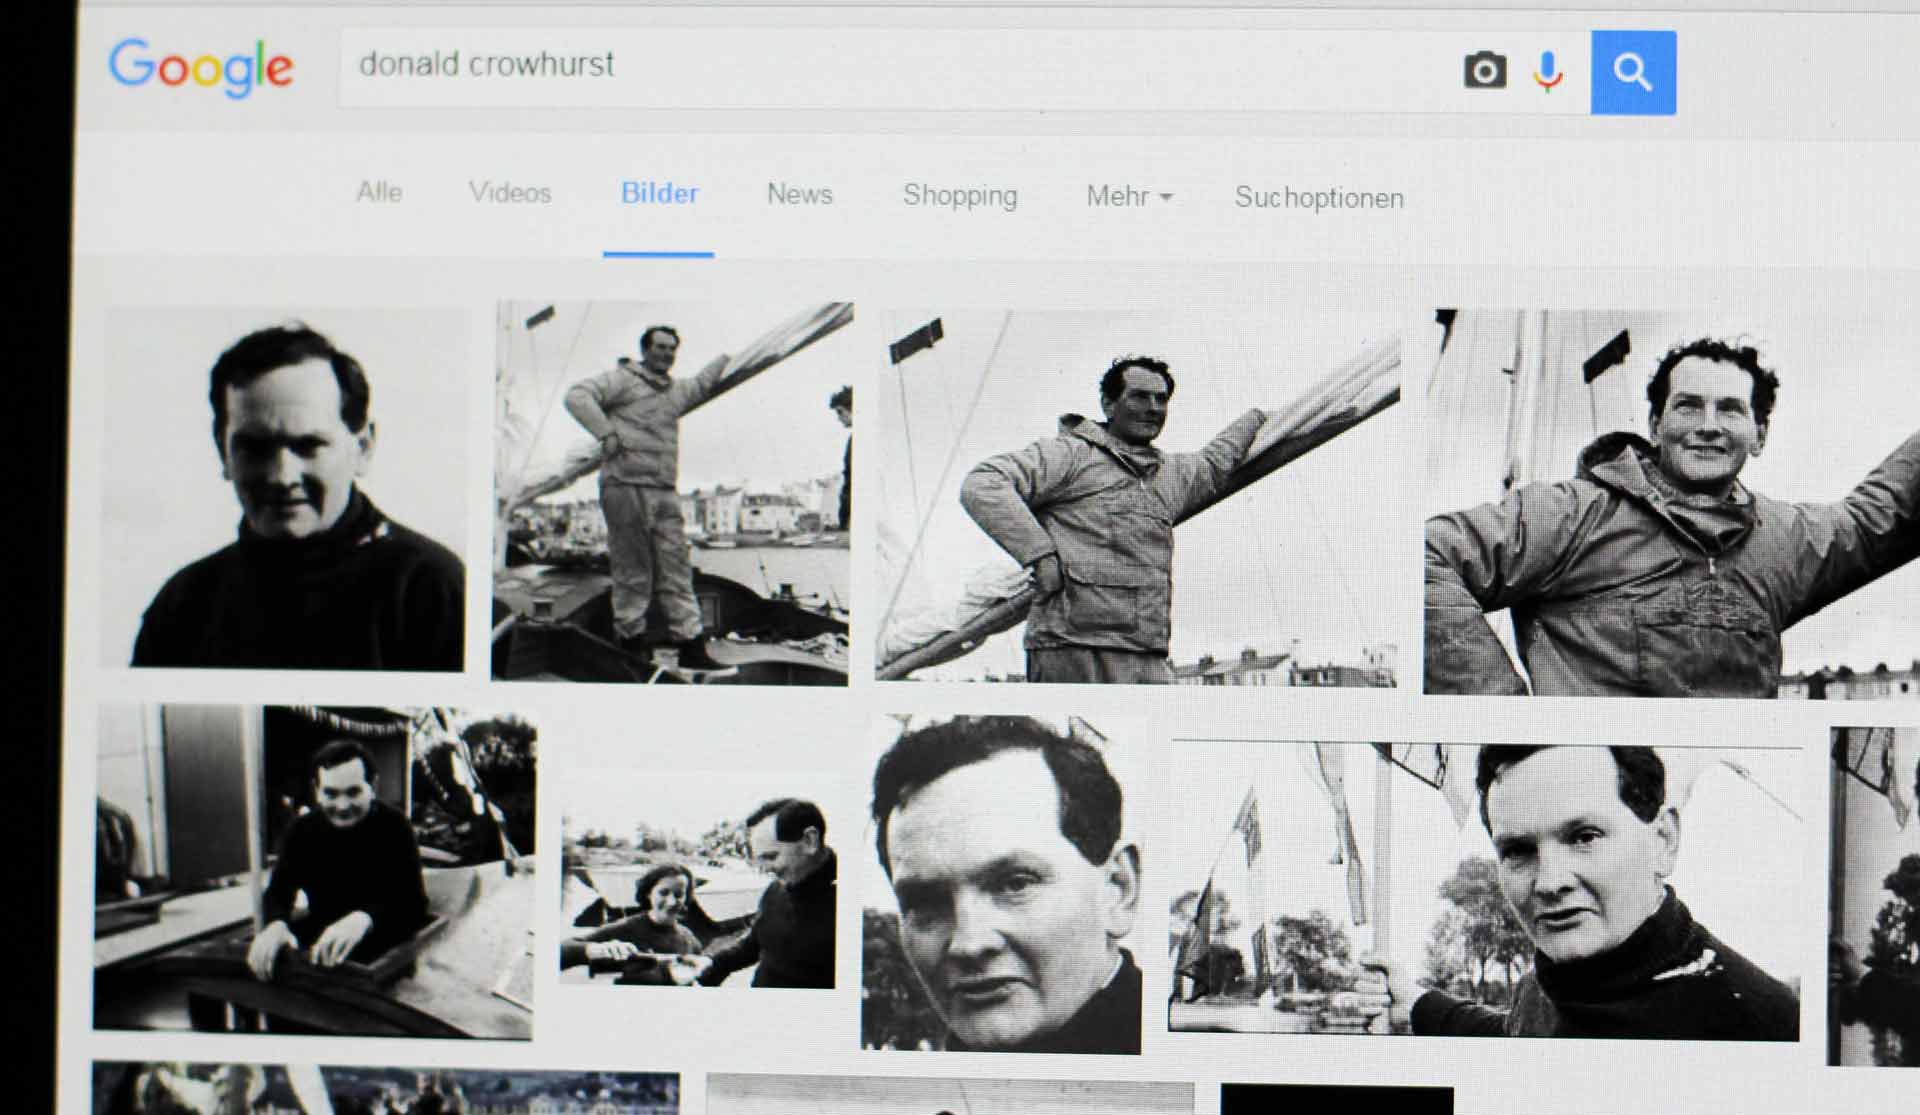 Only a few pictures of Crowhurst available in Google Search